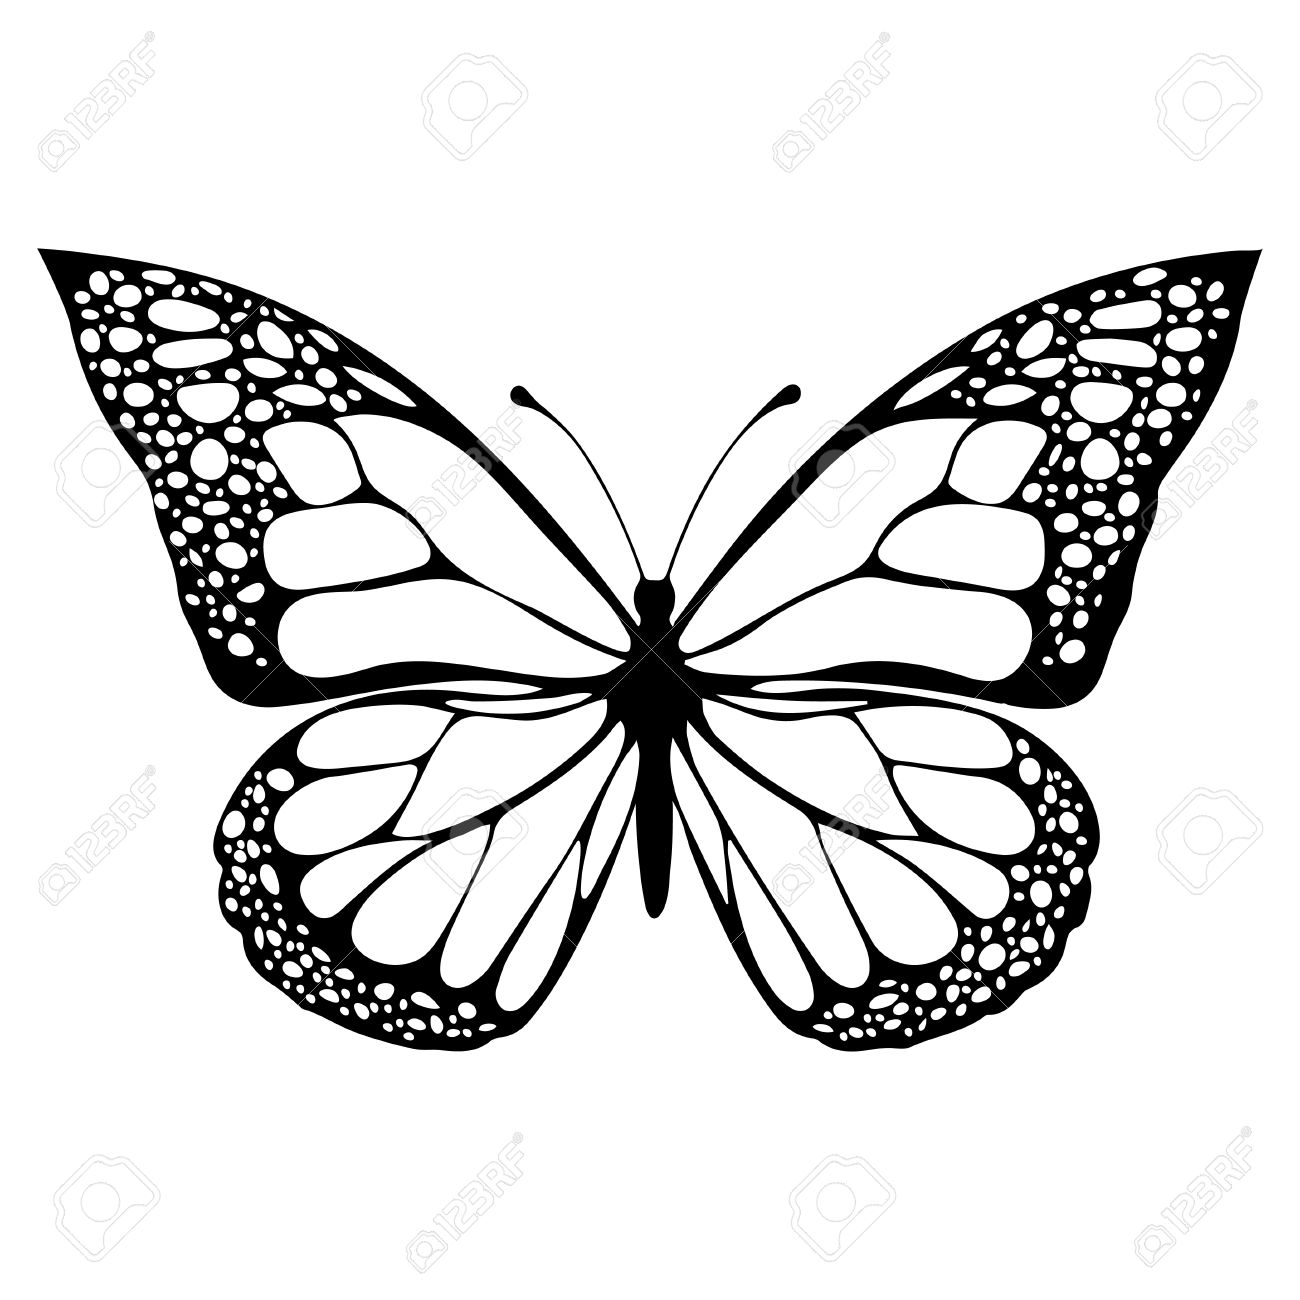 Butterfly Monochrome Coloring Book Black And White Illustration for dimensions 1300 X 1300